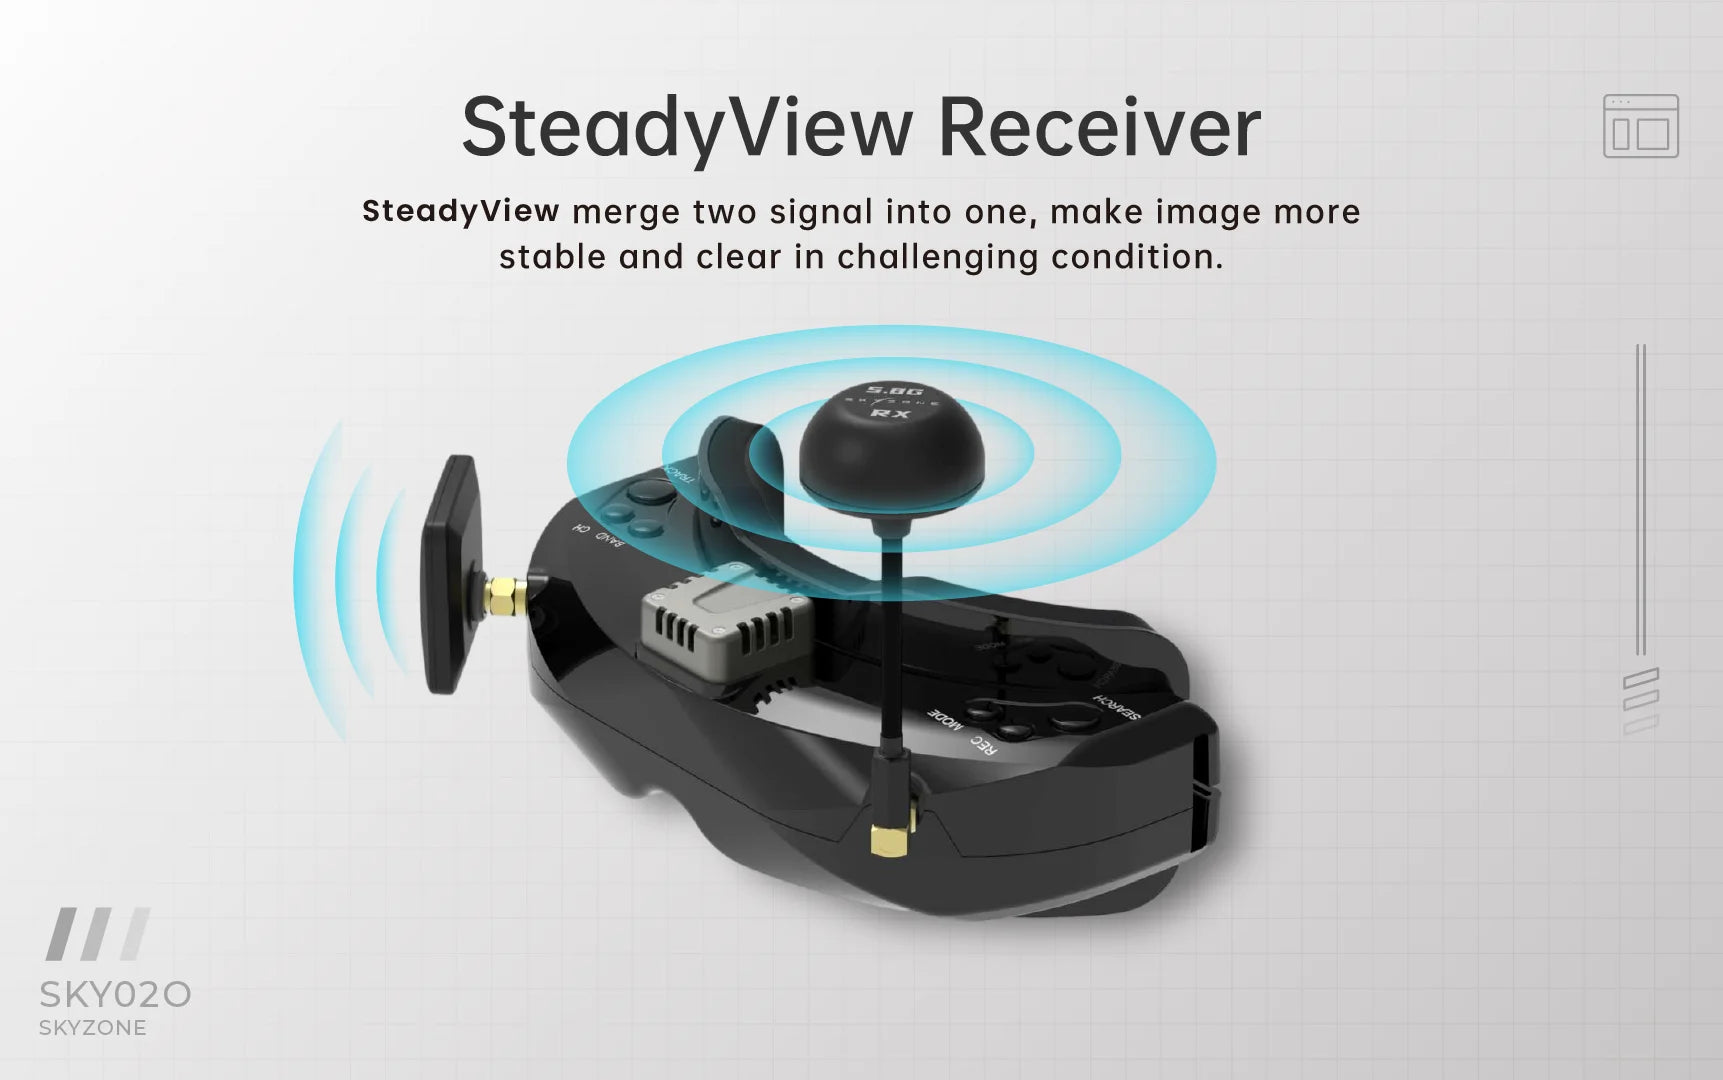 SKYZONE SKY02O FPV Goggle, SteadyView Receiver merge two signal into one, make image more stable and clear